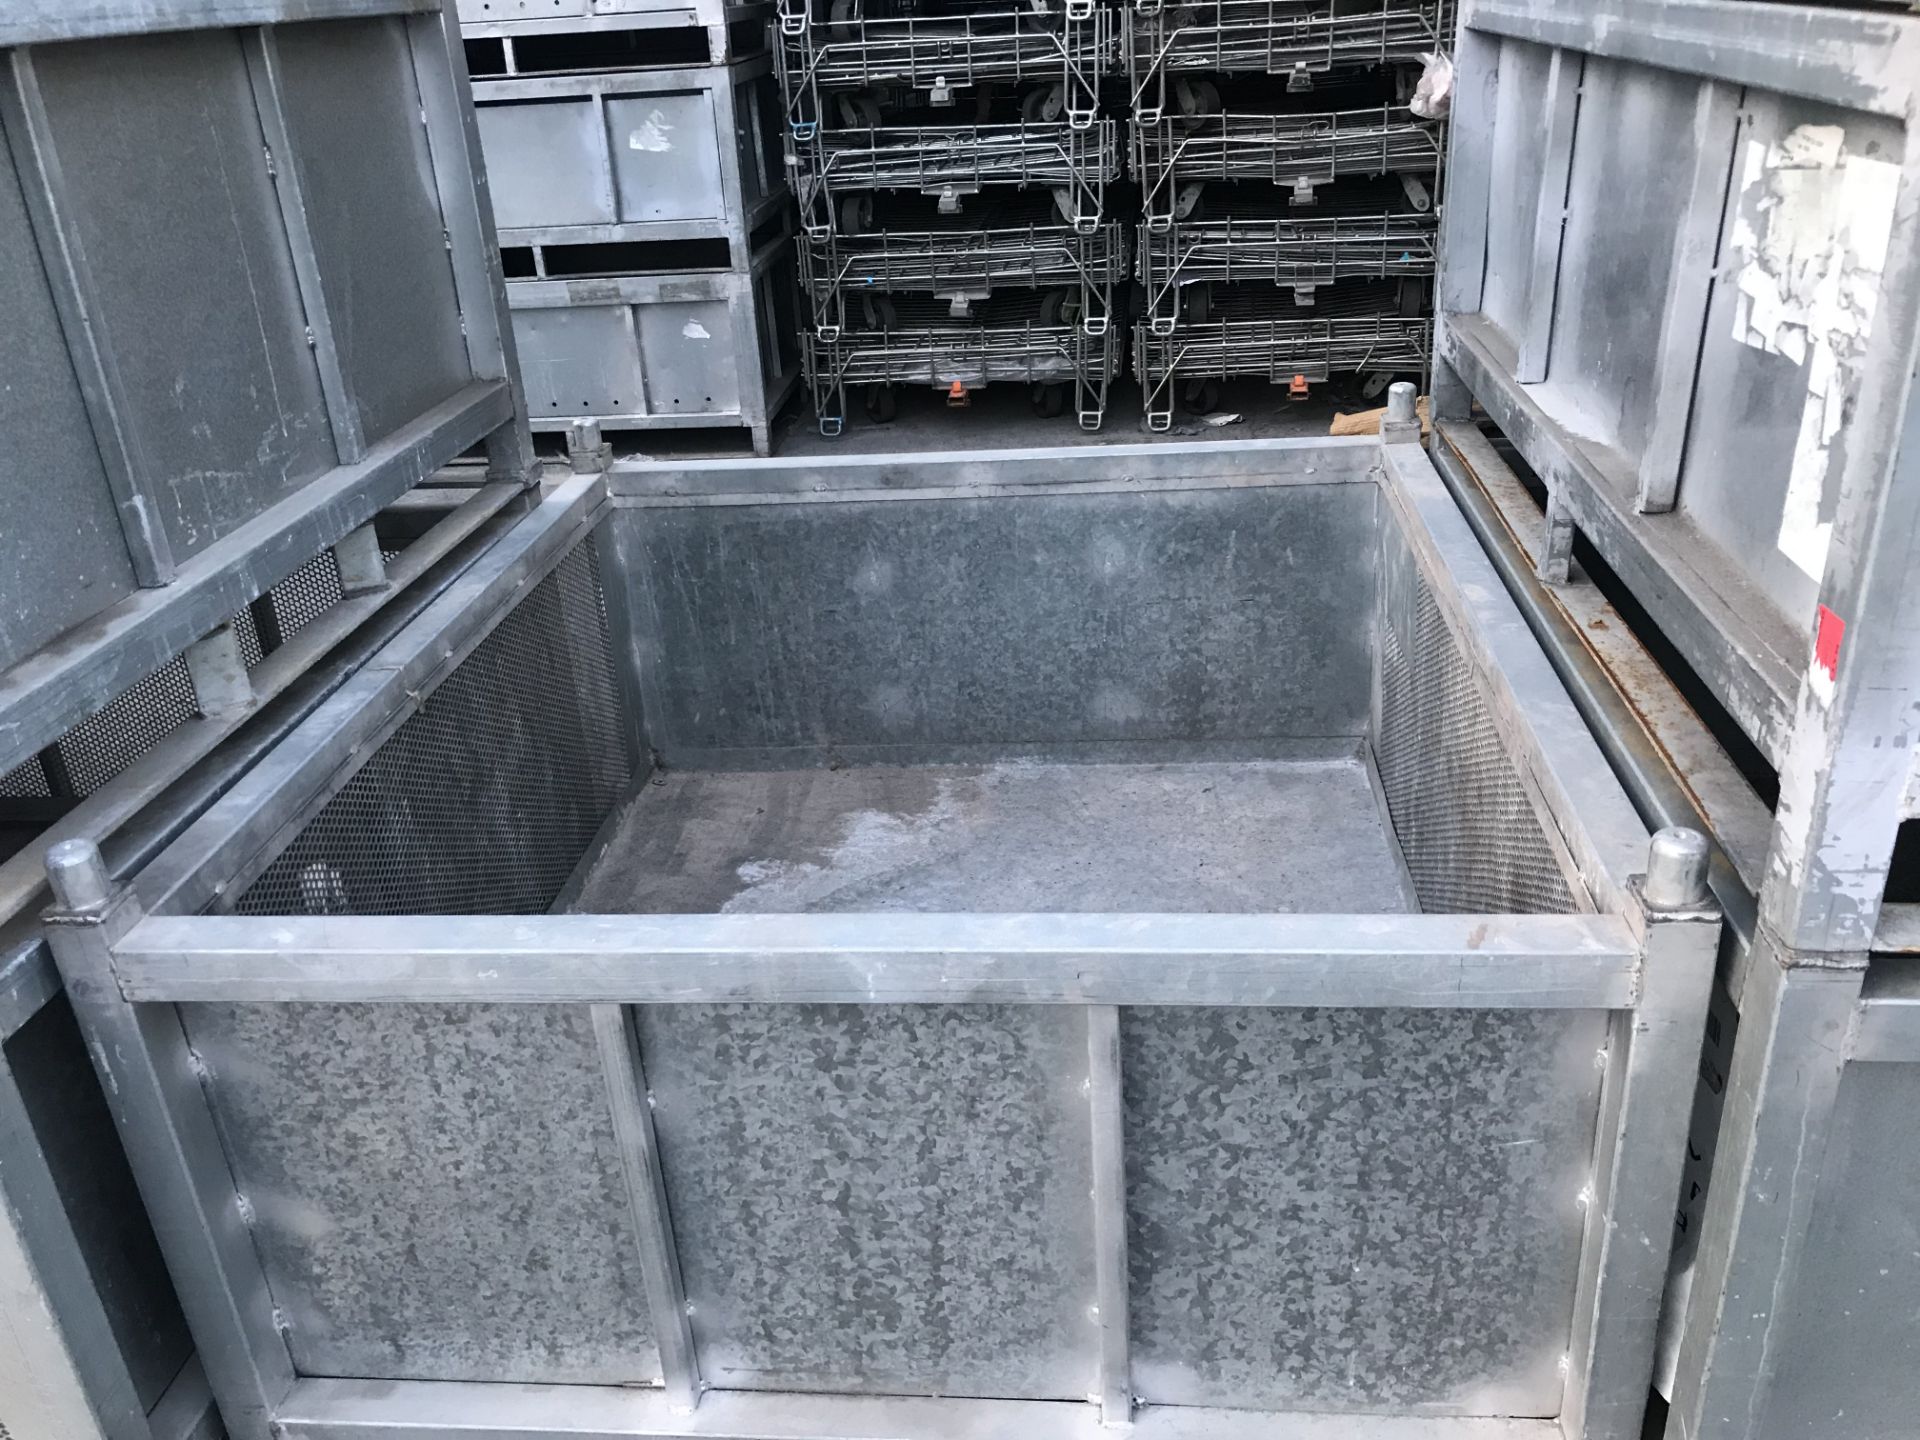 70 GALVANIZED STEEL CONTAINERS XYTEC (DIMENSIONS 0.60x1.32x1.24 METERS)